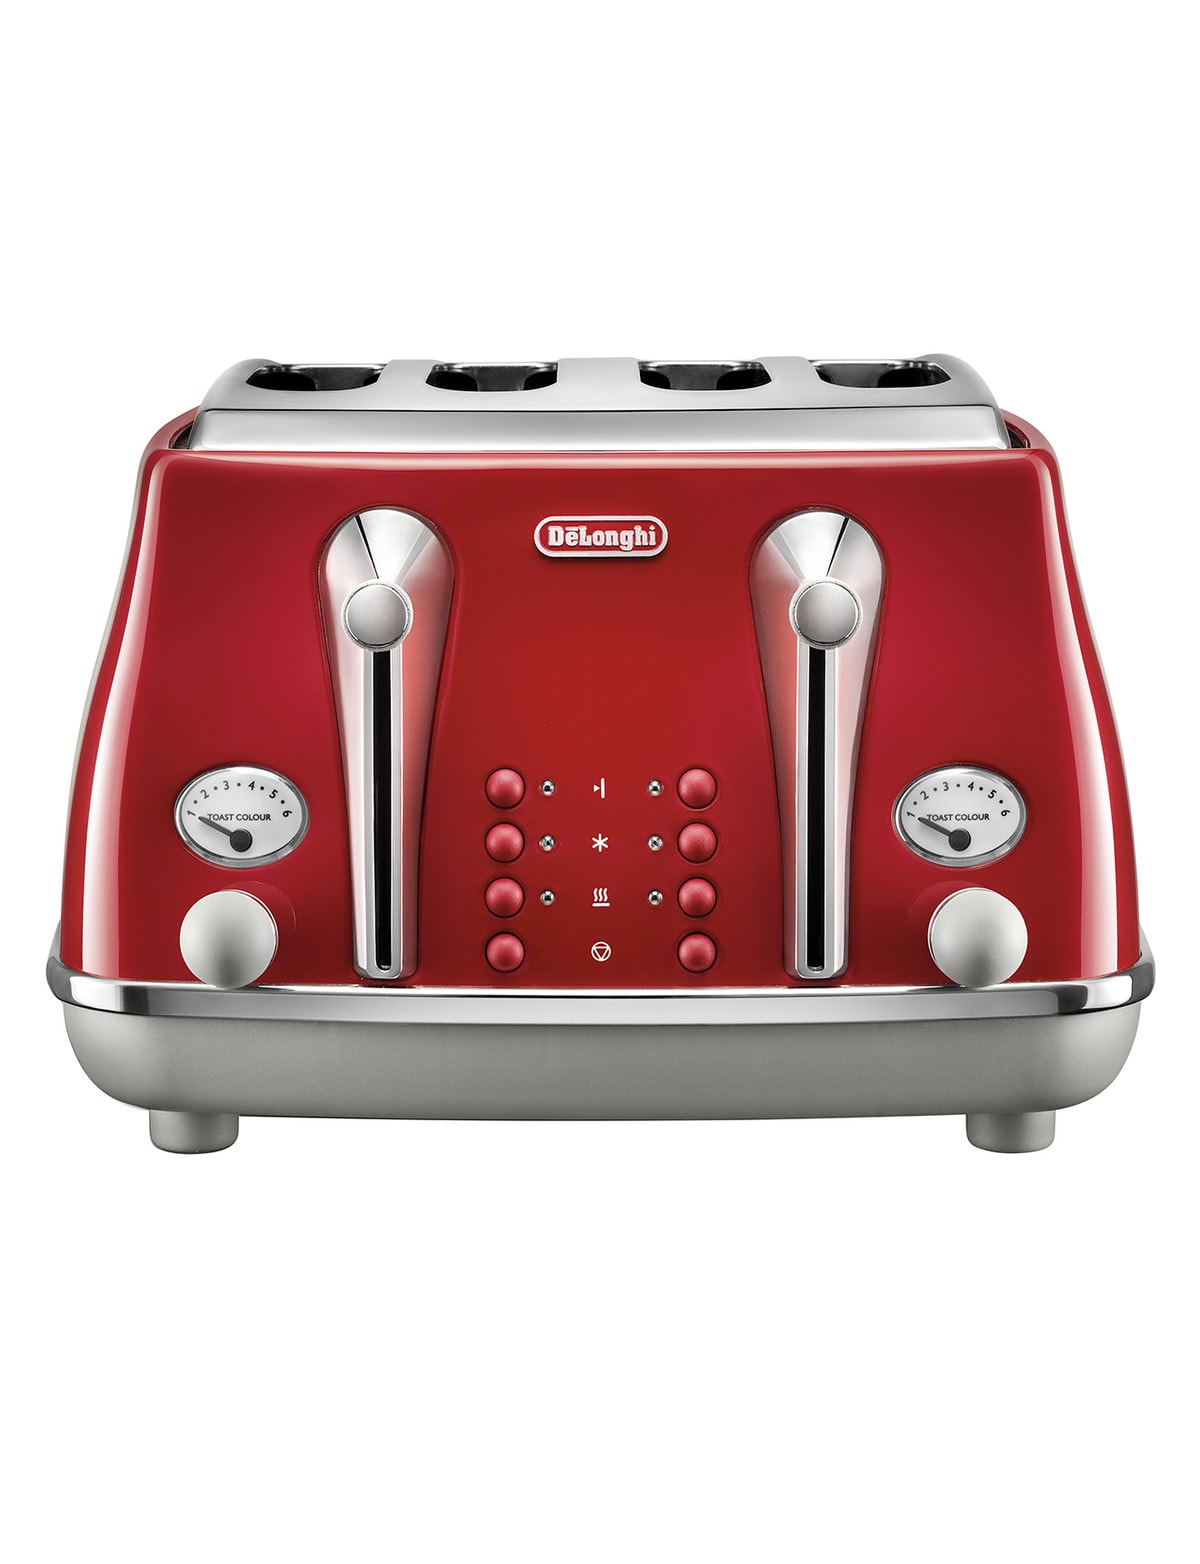 DeLonghi Icona Capitals 4 Slice Toaster, Red, CTOC4003R - Toasters